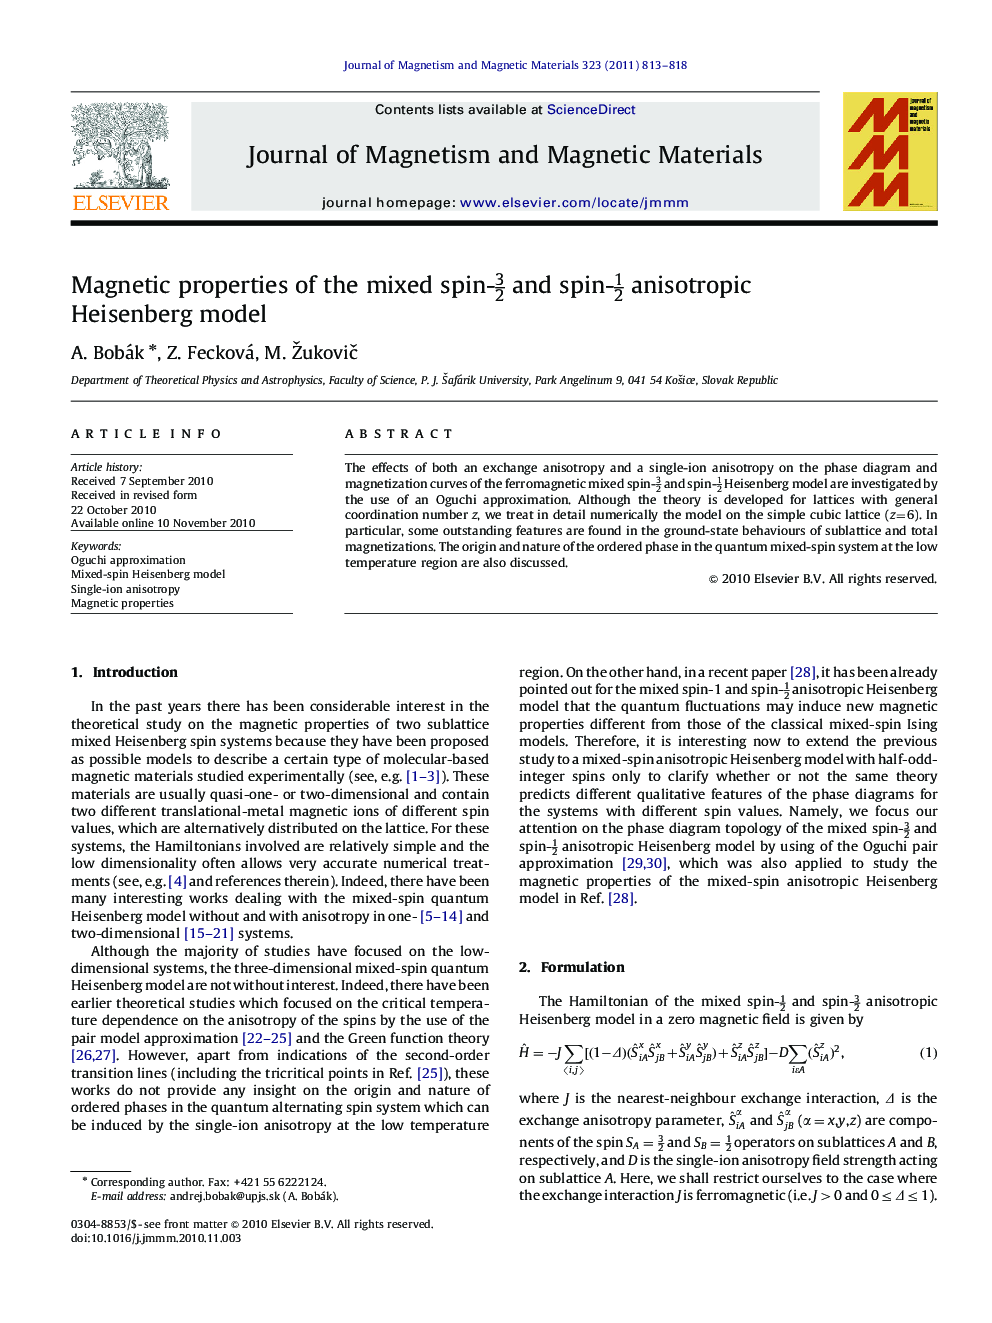 Magnetic properties of the mixed spin-32 and spin-12 anisotropic Heisenberg model